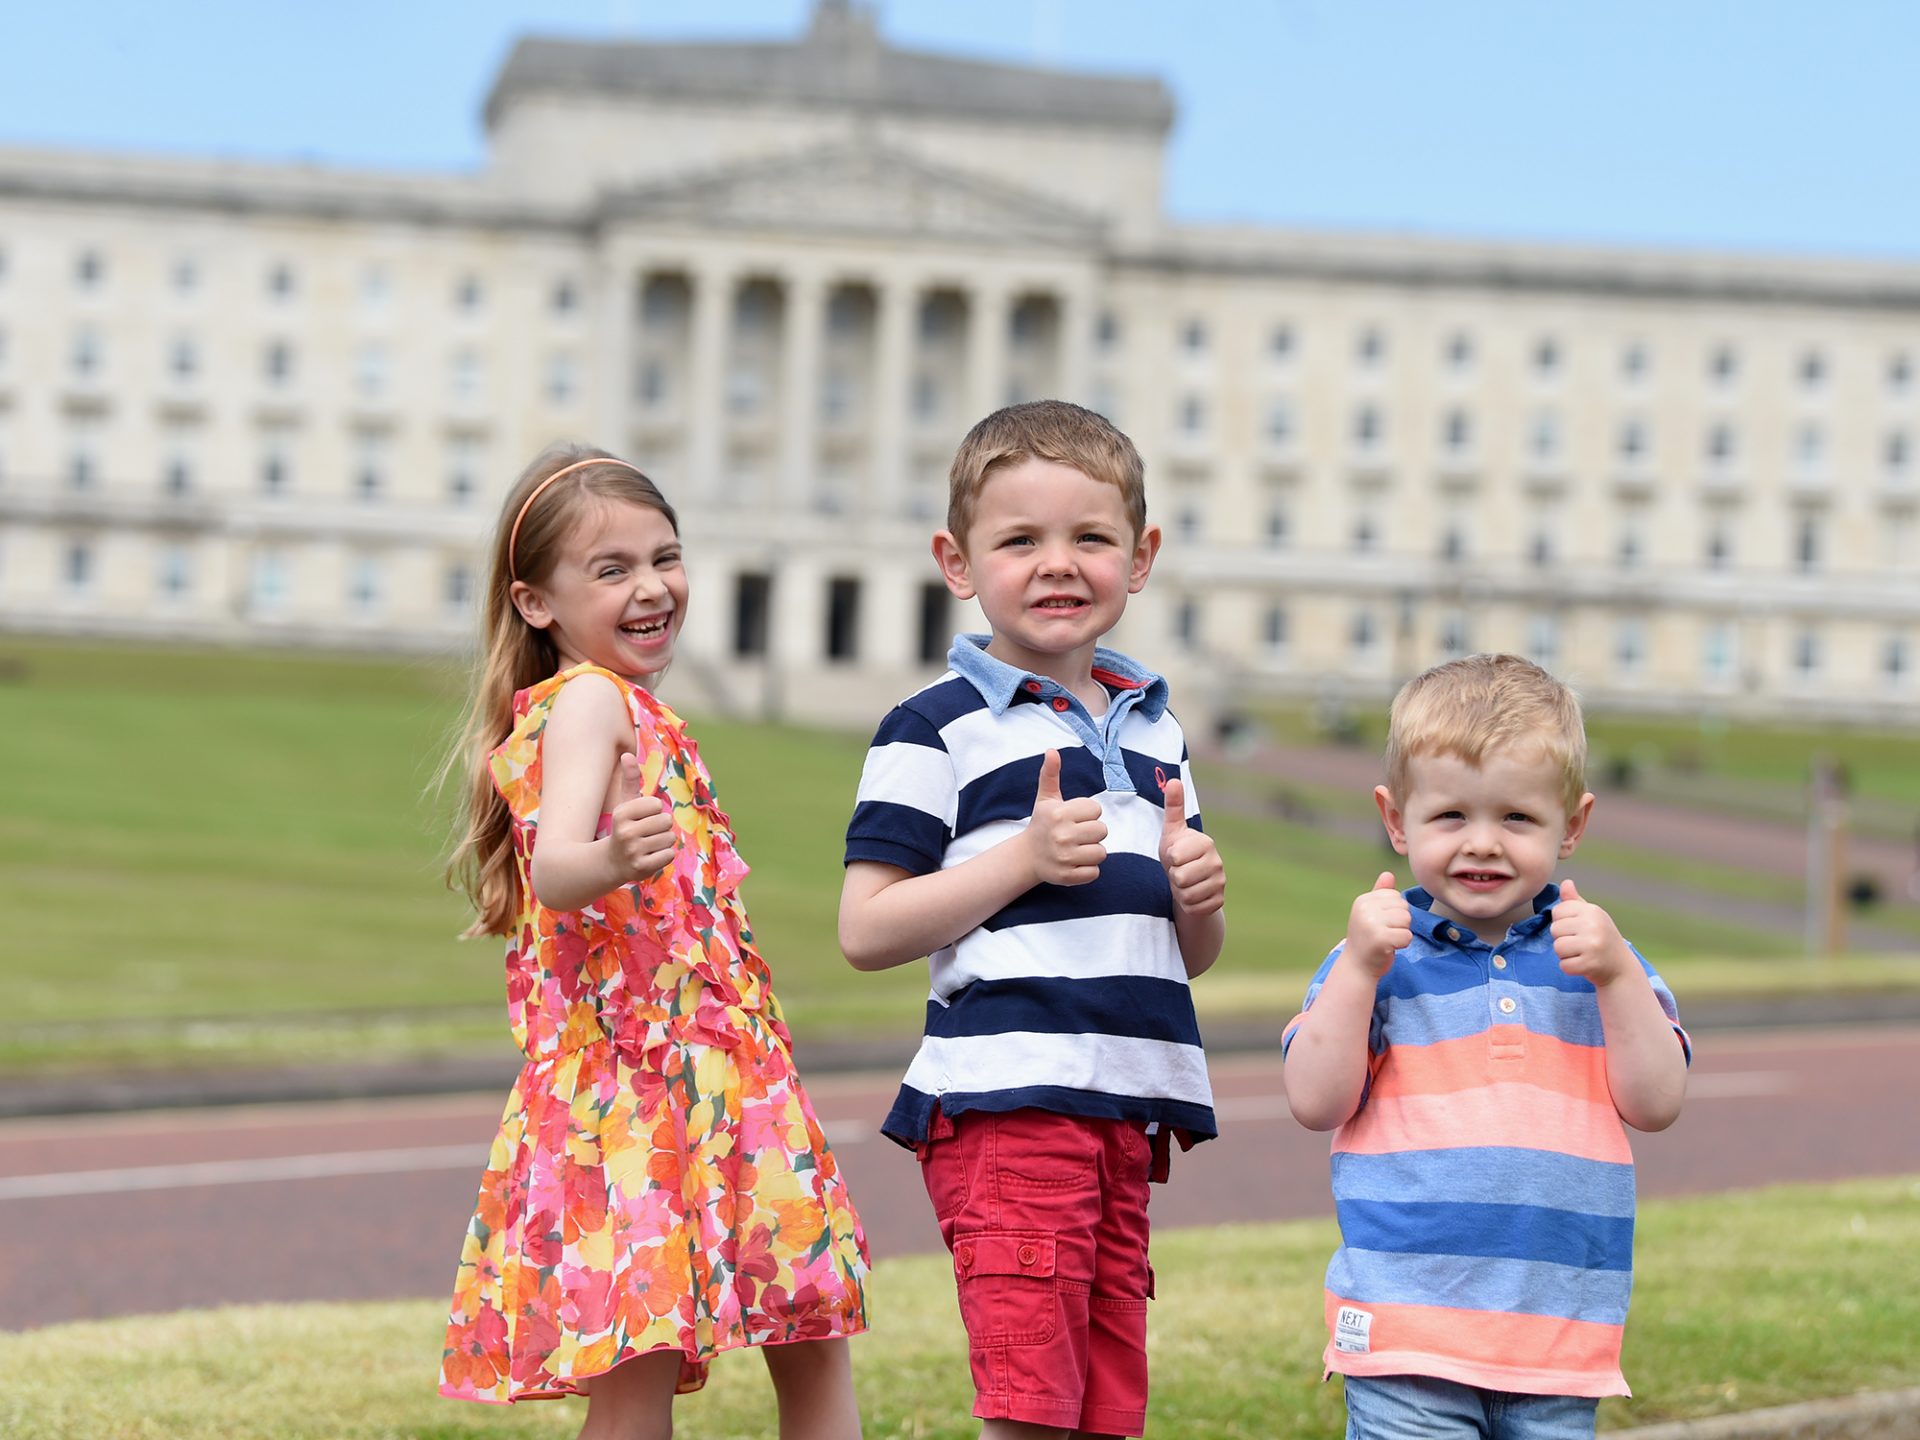 Childcare must be a day one priority for new Education and Economy Ministers